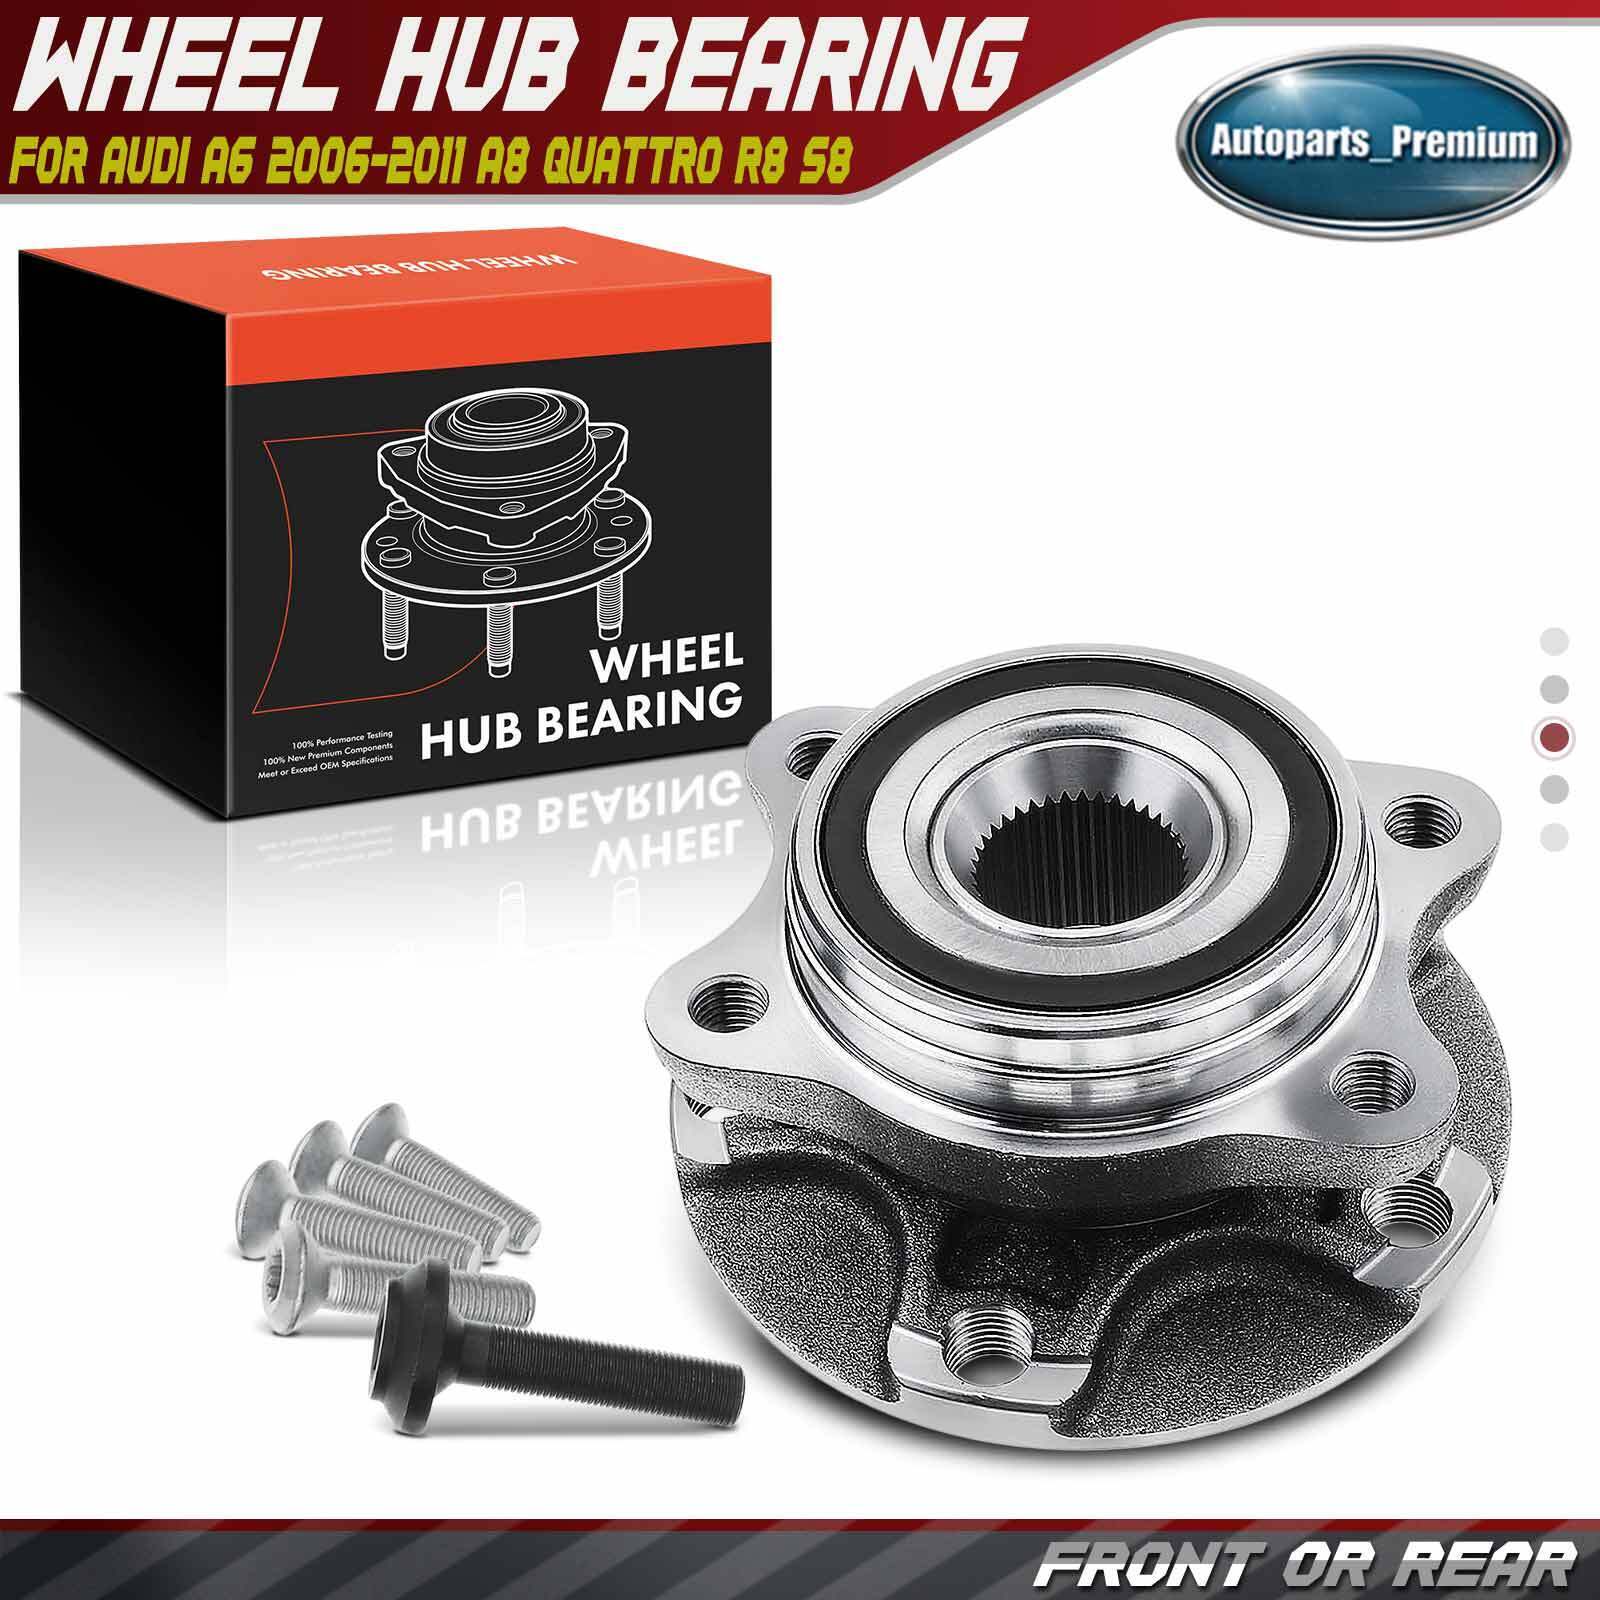 Wheel Hub Bearing Assembly for Audi A6 A8 Quattro R8 S8 Left or Right 4D0407613E